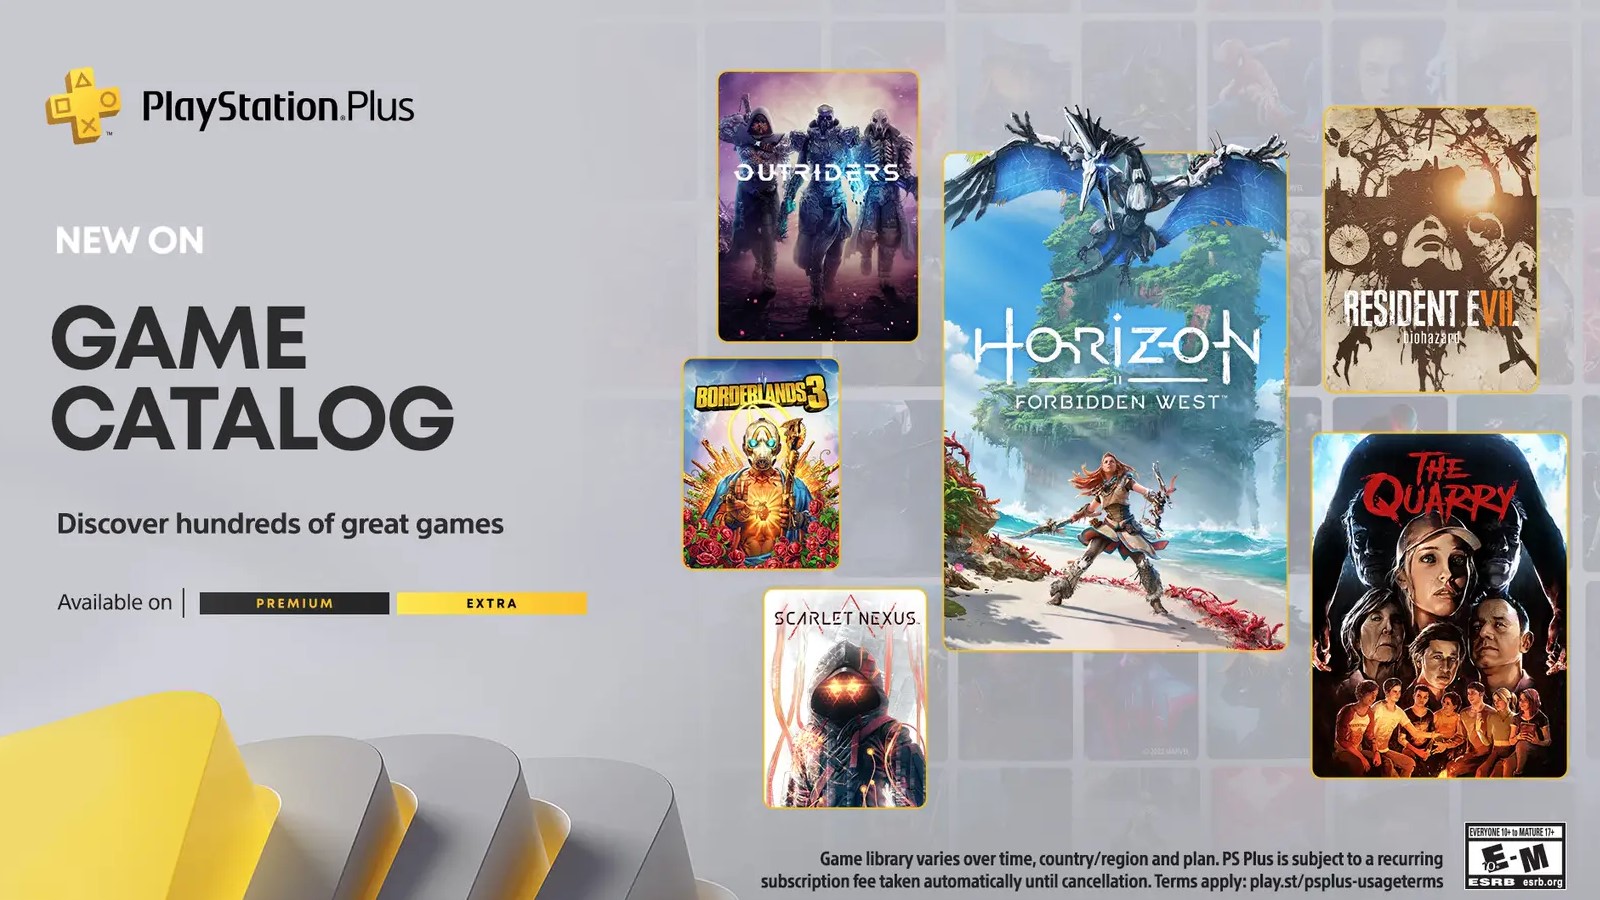 A ton of new content is heading to the PlayStation Plus Game Catalog this month, including Horizon, The Quarry, and Tekken 7